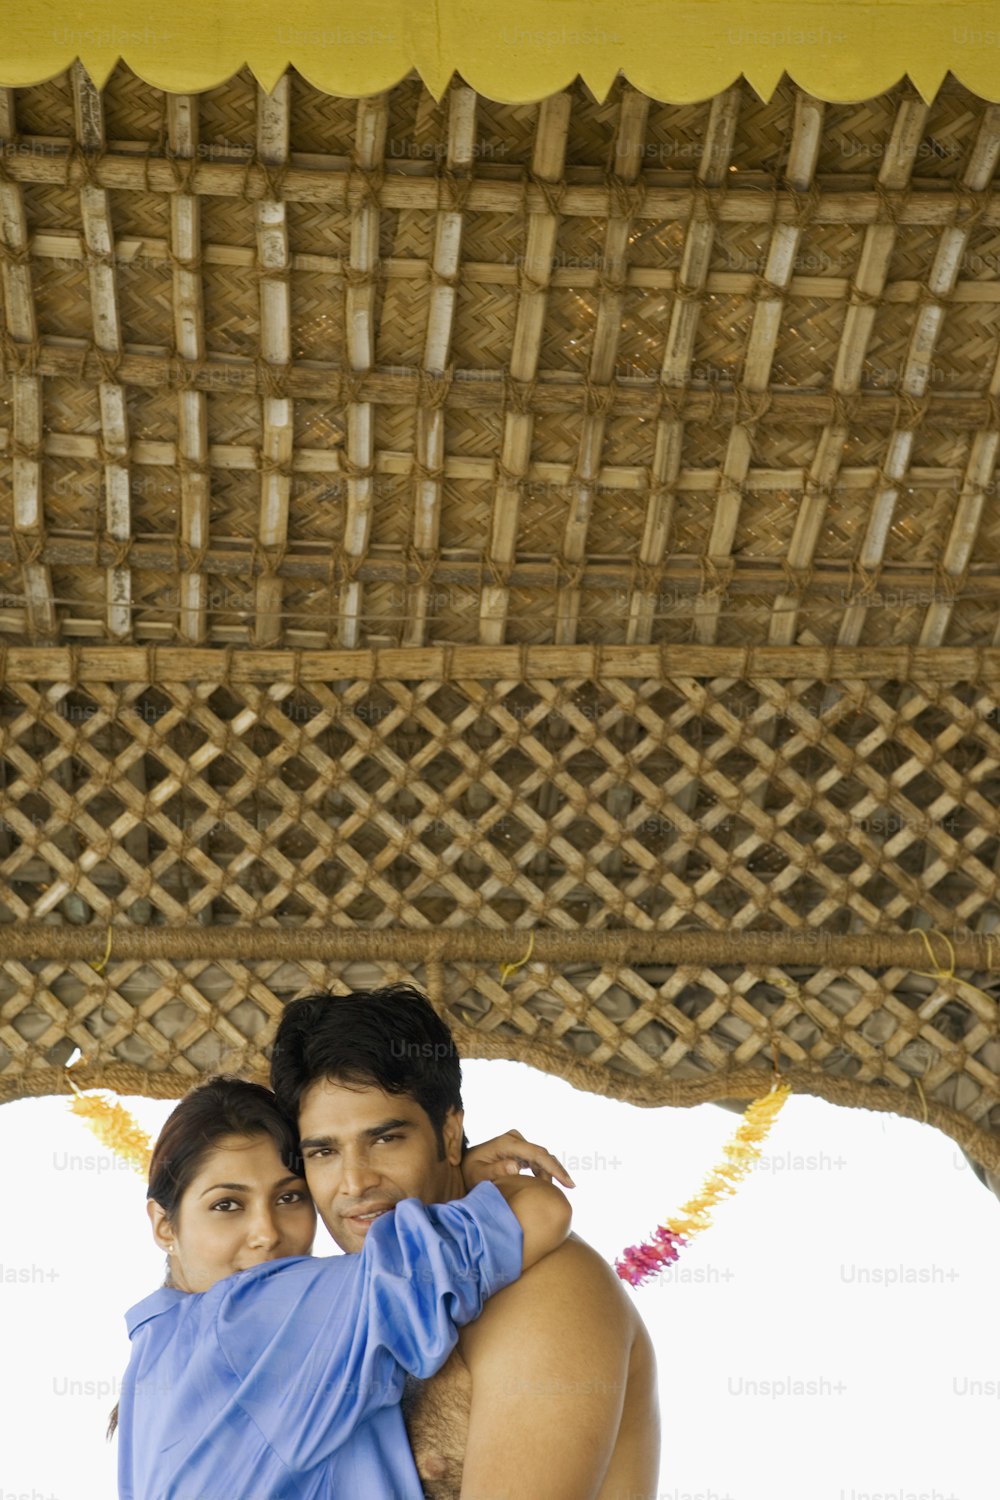 a man and a woman standing under a thatched roof